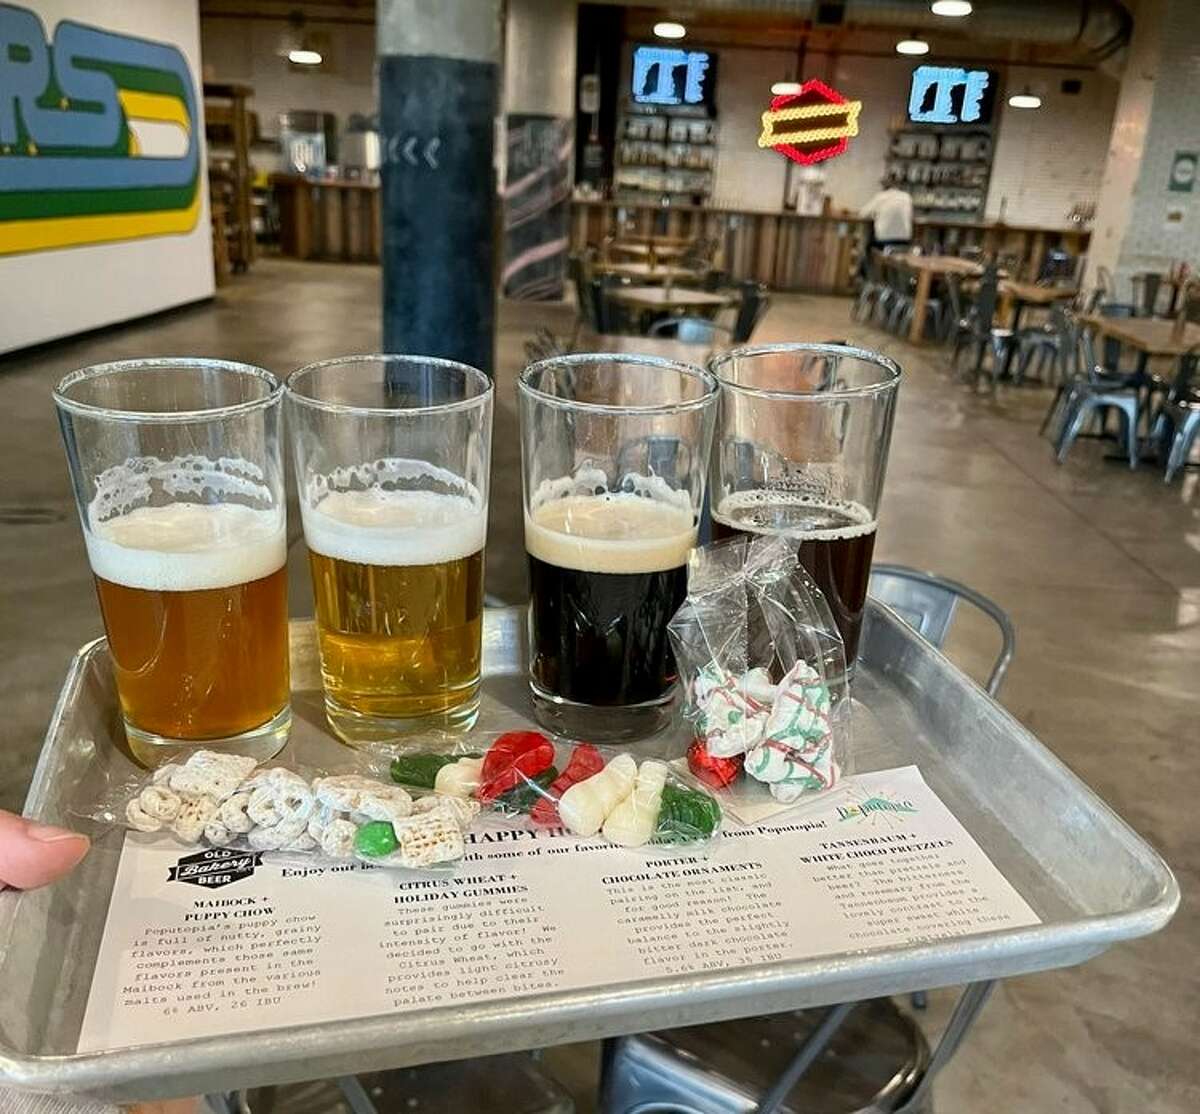 For sampling, the craft brewery also has its Holiday Treat plus Beer Pairing Flights available now through Christmas. Each flight features four ounces each of four different beer selected to pair perfectly with four sweet treats from Poputopia Gourmet Popcorn and Sweets.  